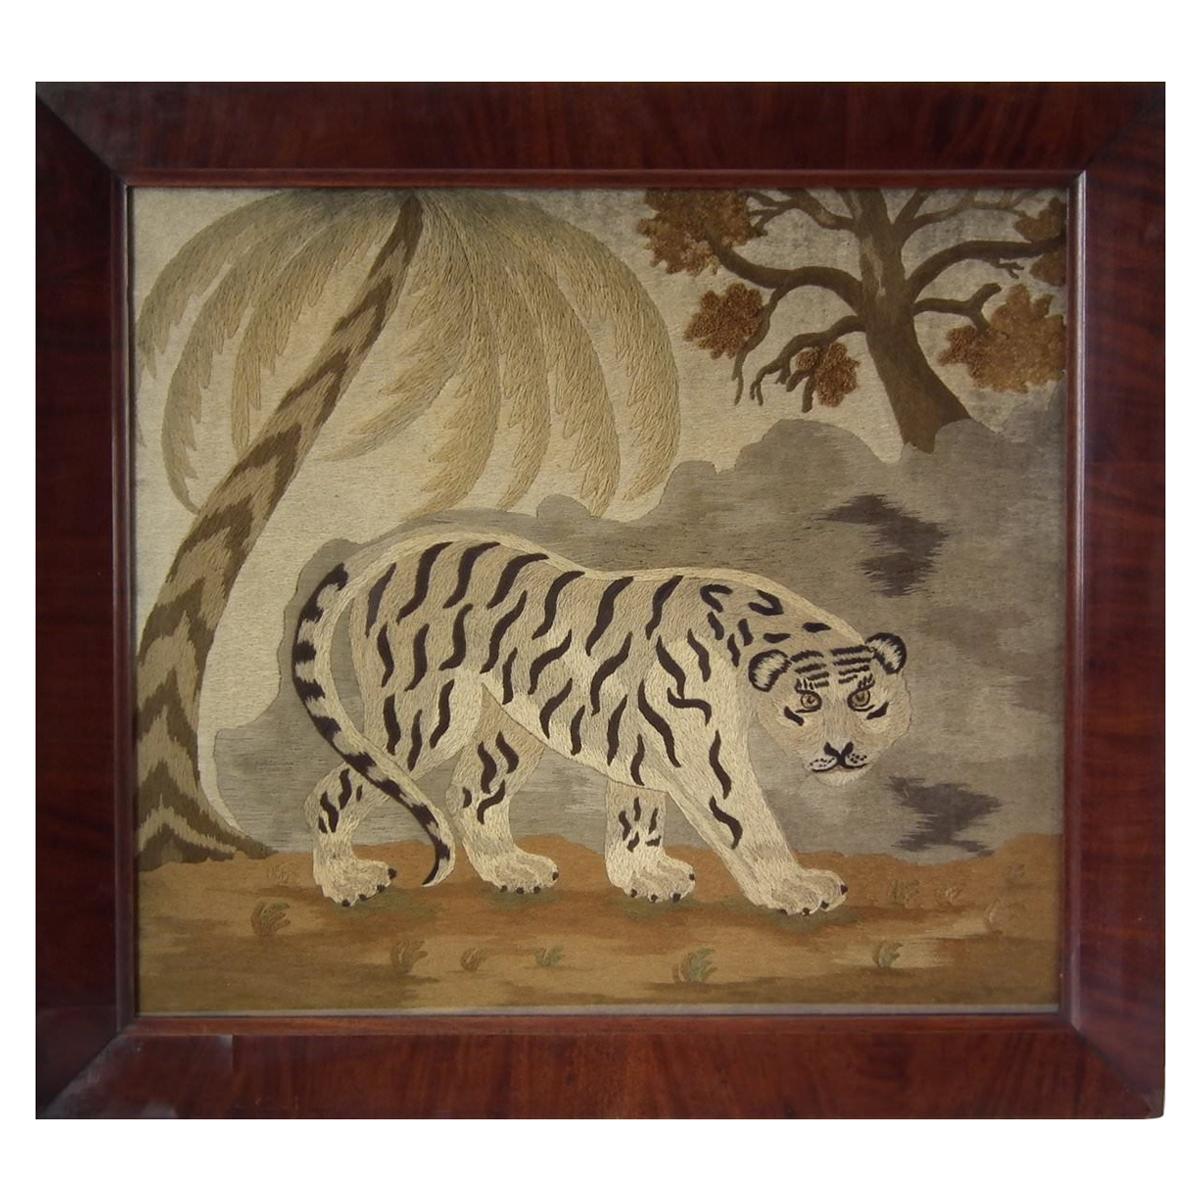 Victorian Wool Work Embroidered Picture of a Tiger